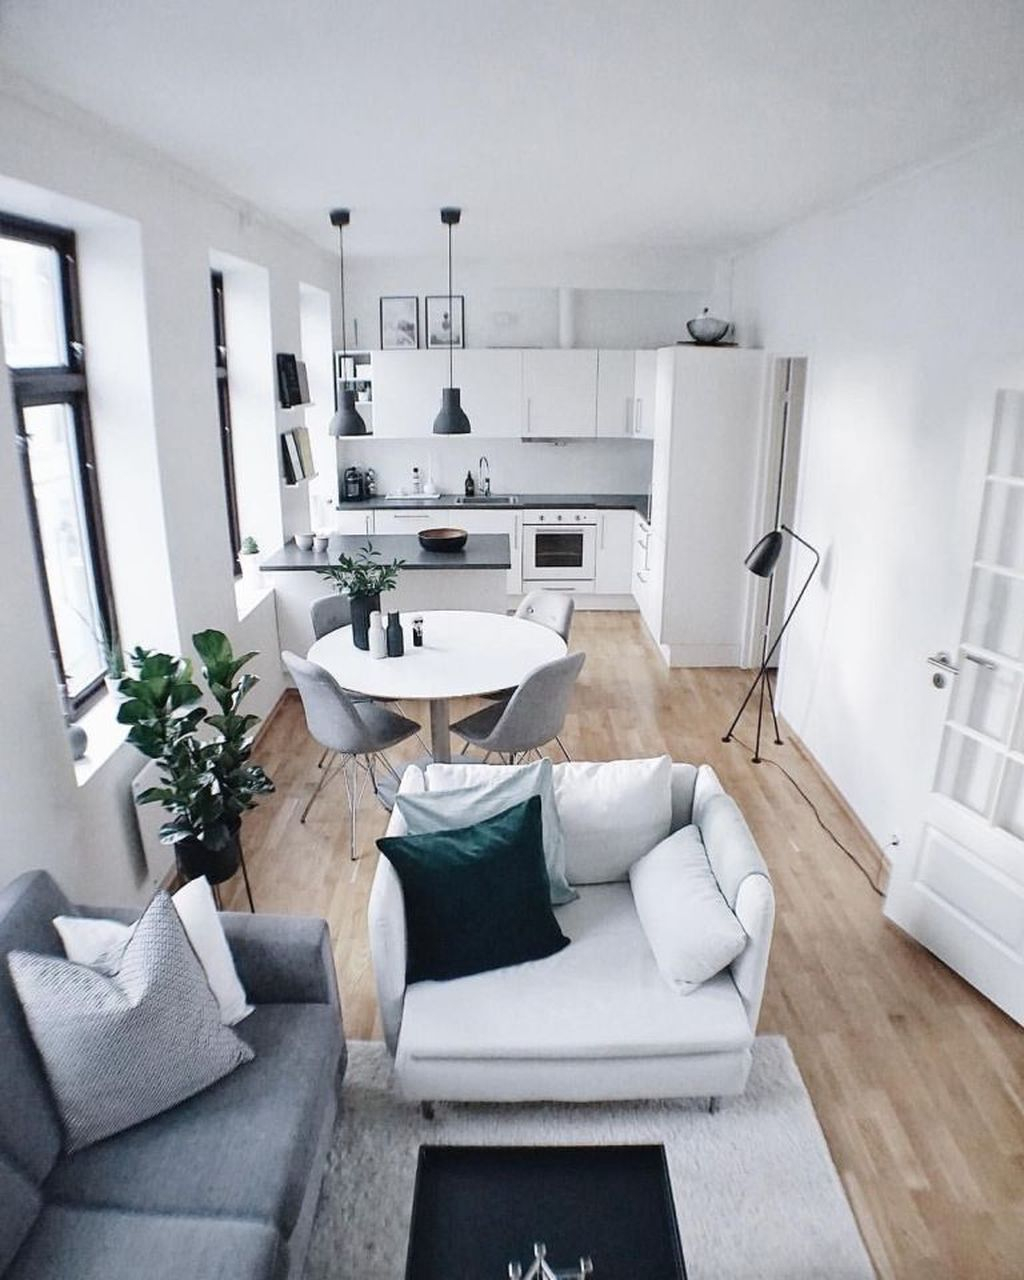 10 Affordable Interior Design Ideas For Small Apartments